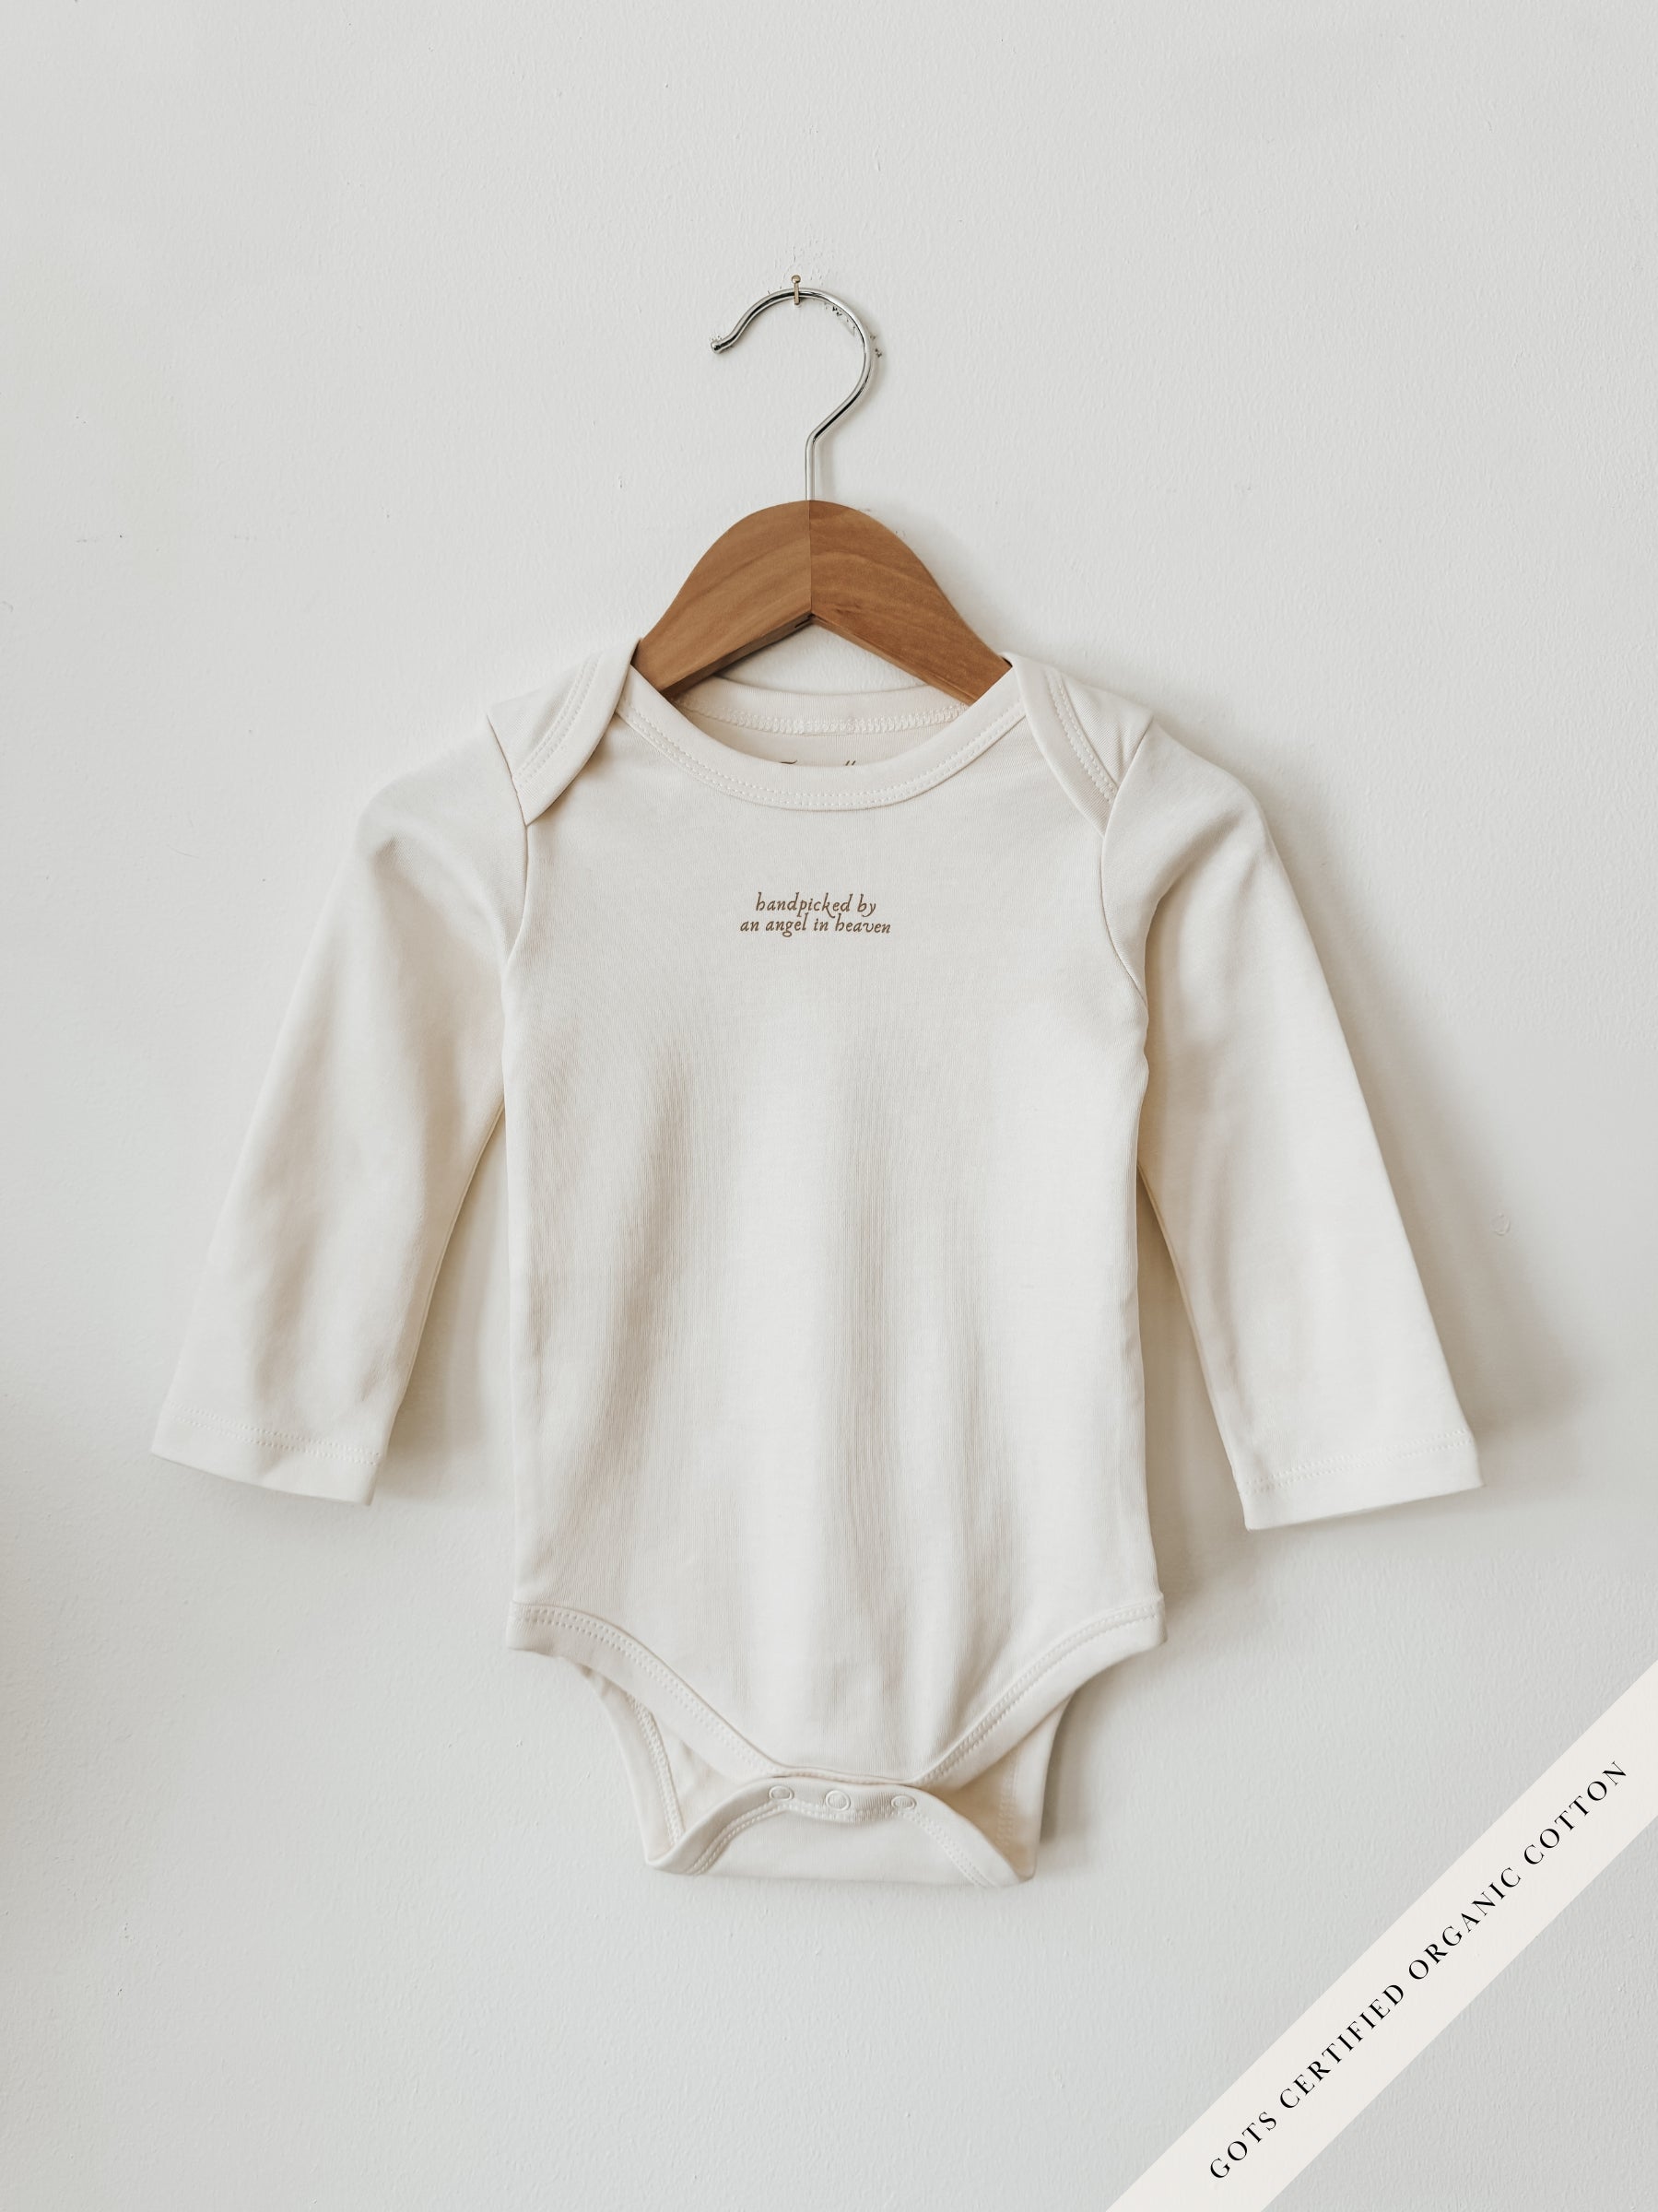 Classic Long Sleeve Bodysuit | Hand Picked By An Angel